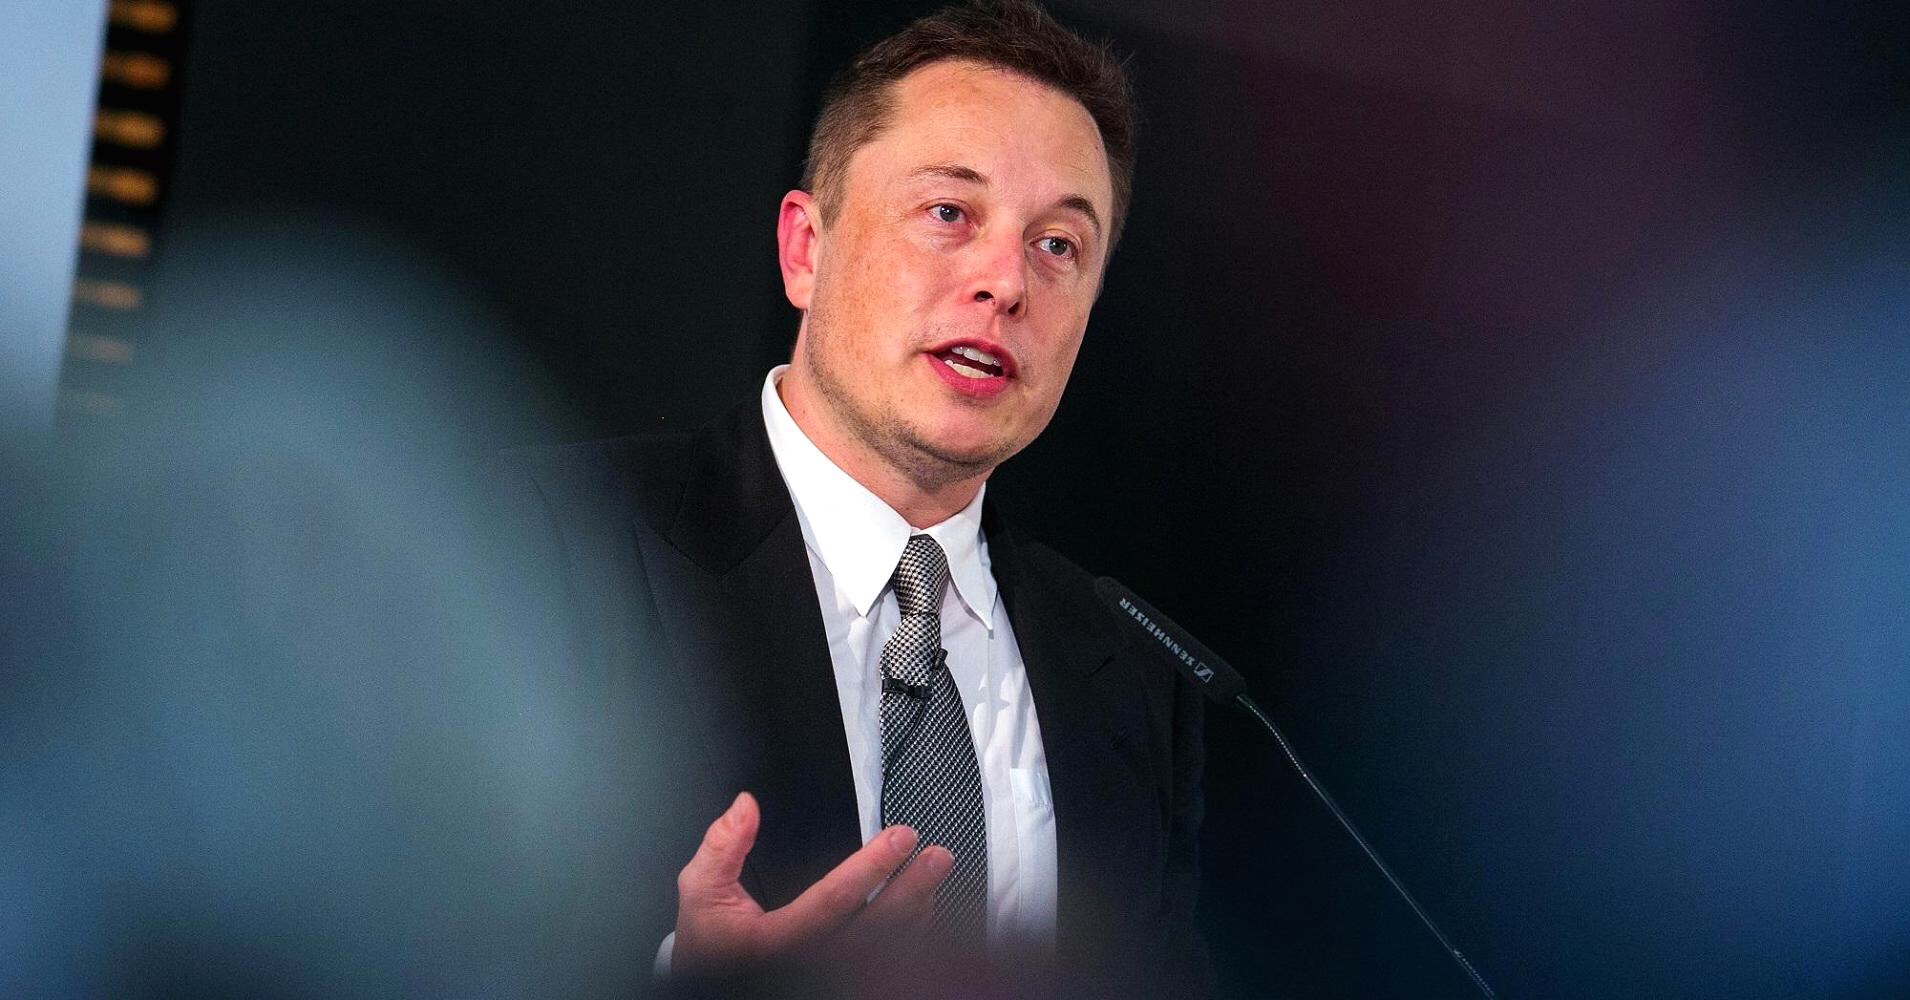 Elon Musk promises to build a pickup truck “right after Model Y”